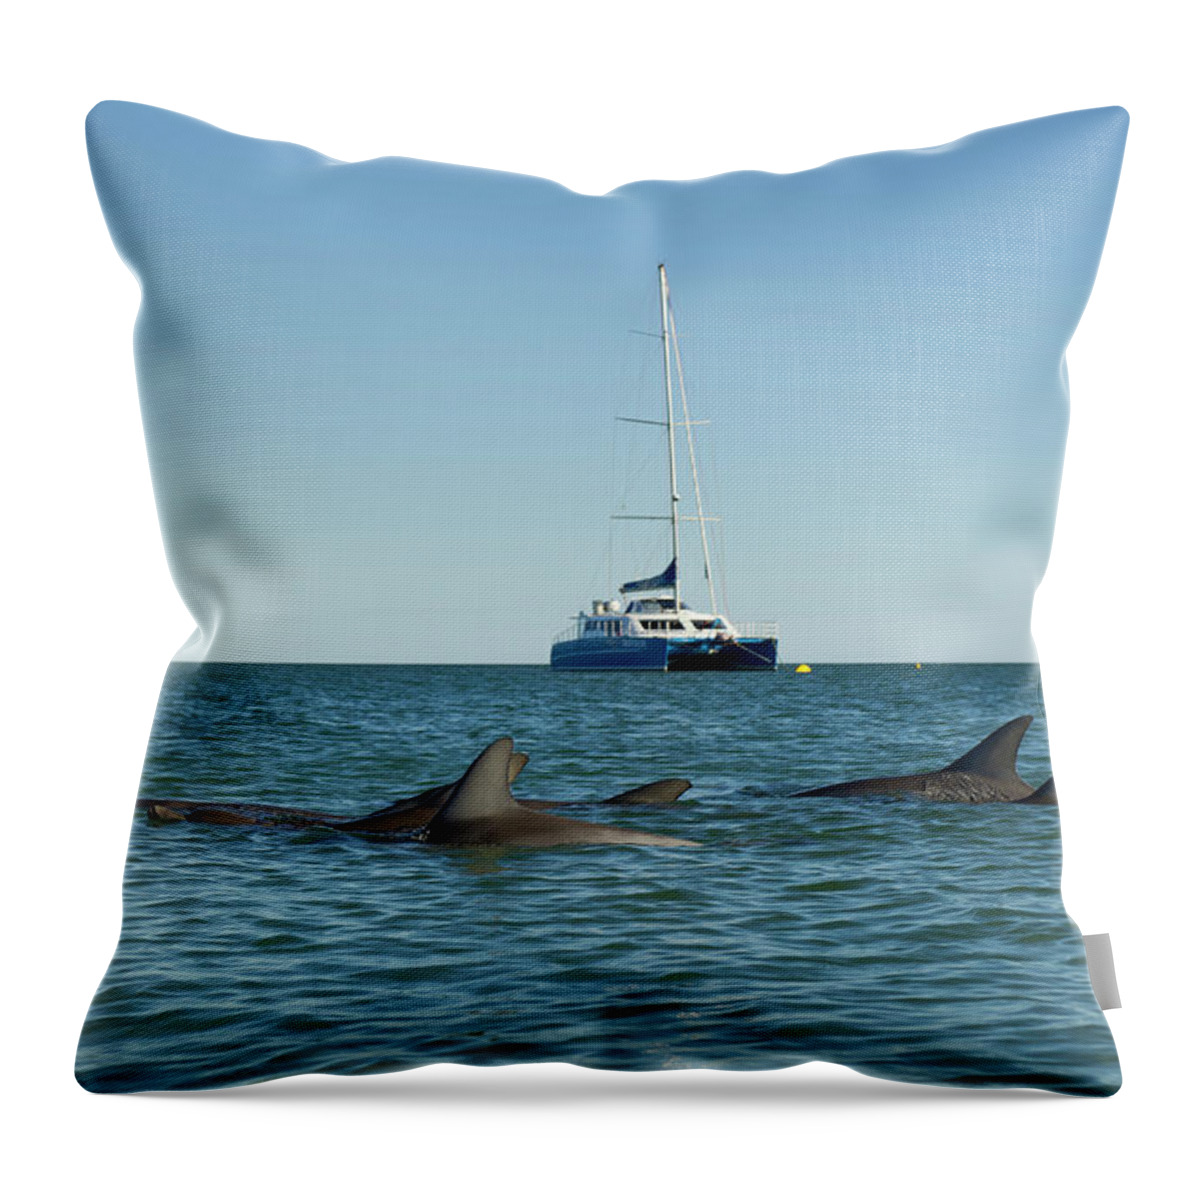 Ip_10275851 Throw Pillow featuring the photograph Dolphins And Yacht In Shark Bay, Monkey Mia, Australia #1 by Lukas Larsson Jalag